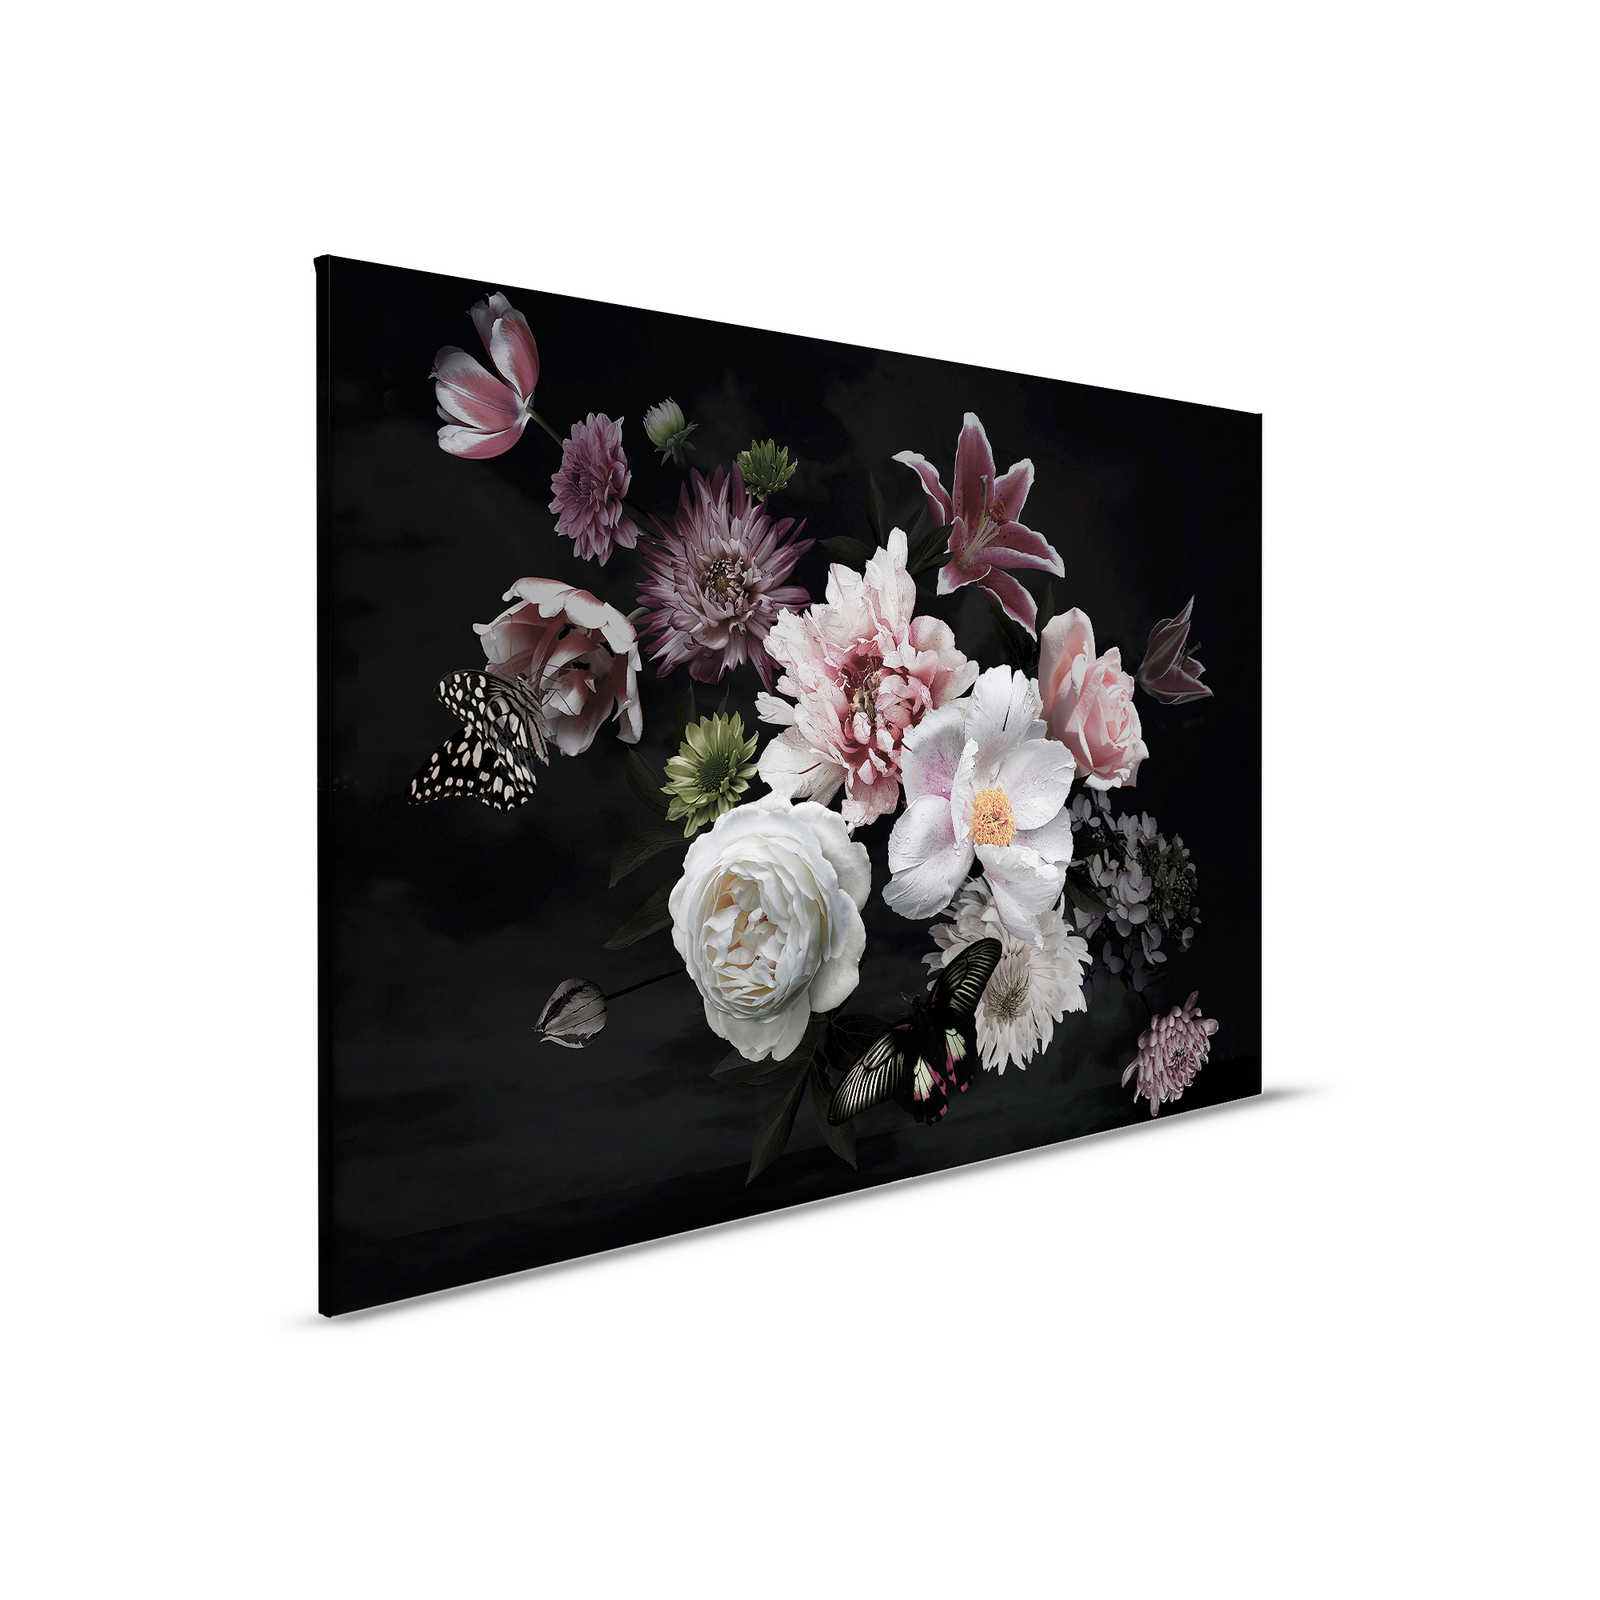 Canvas painting various flowers with butterfly - 0,90 m x 0,60 m
